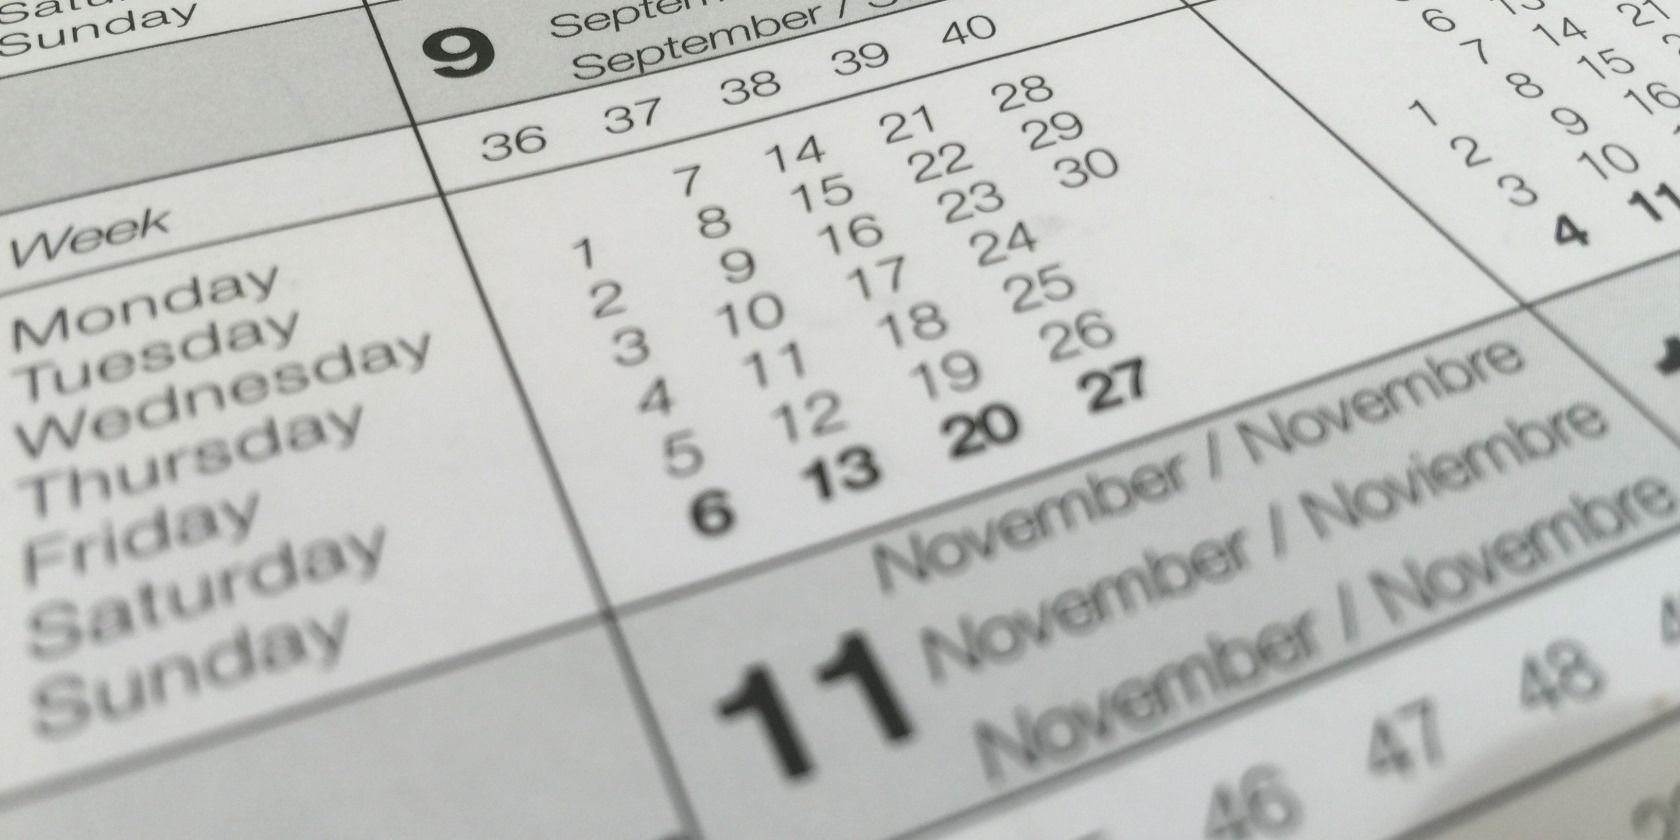 Use the date wisely in SQL